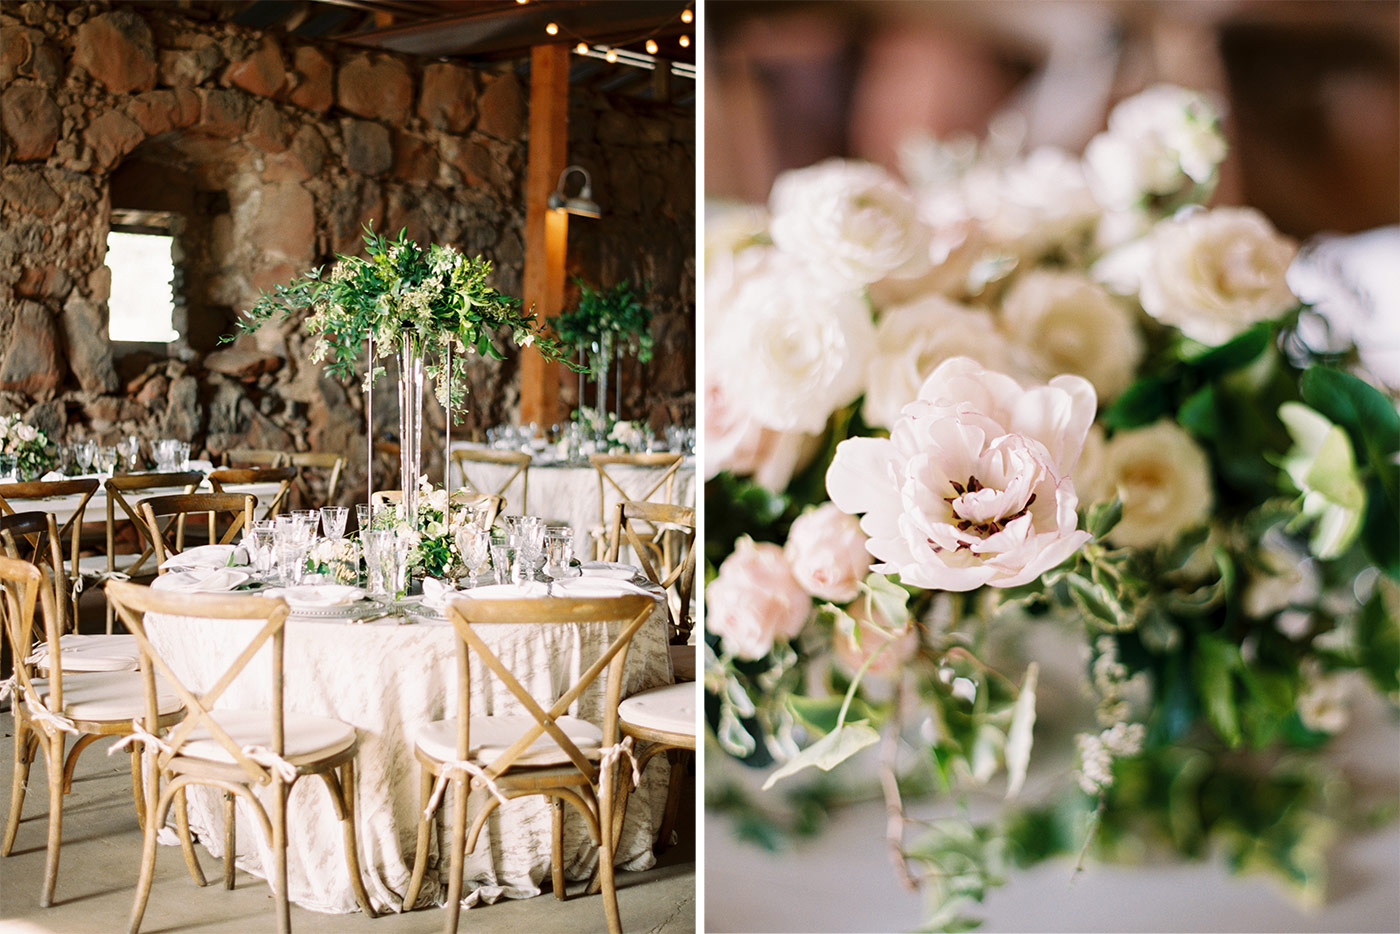 Santa Margarita Ranch Wedding Designed by Danae Grace Events, Florals by Noonan's Wine Country Designs and Photographed by Ashley Ludaescher Photography